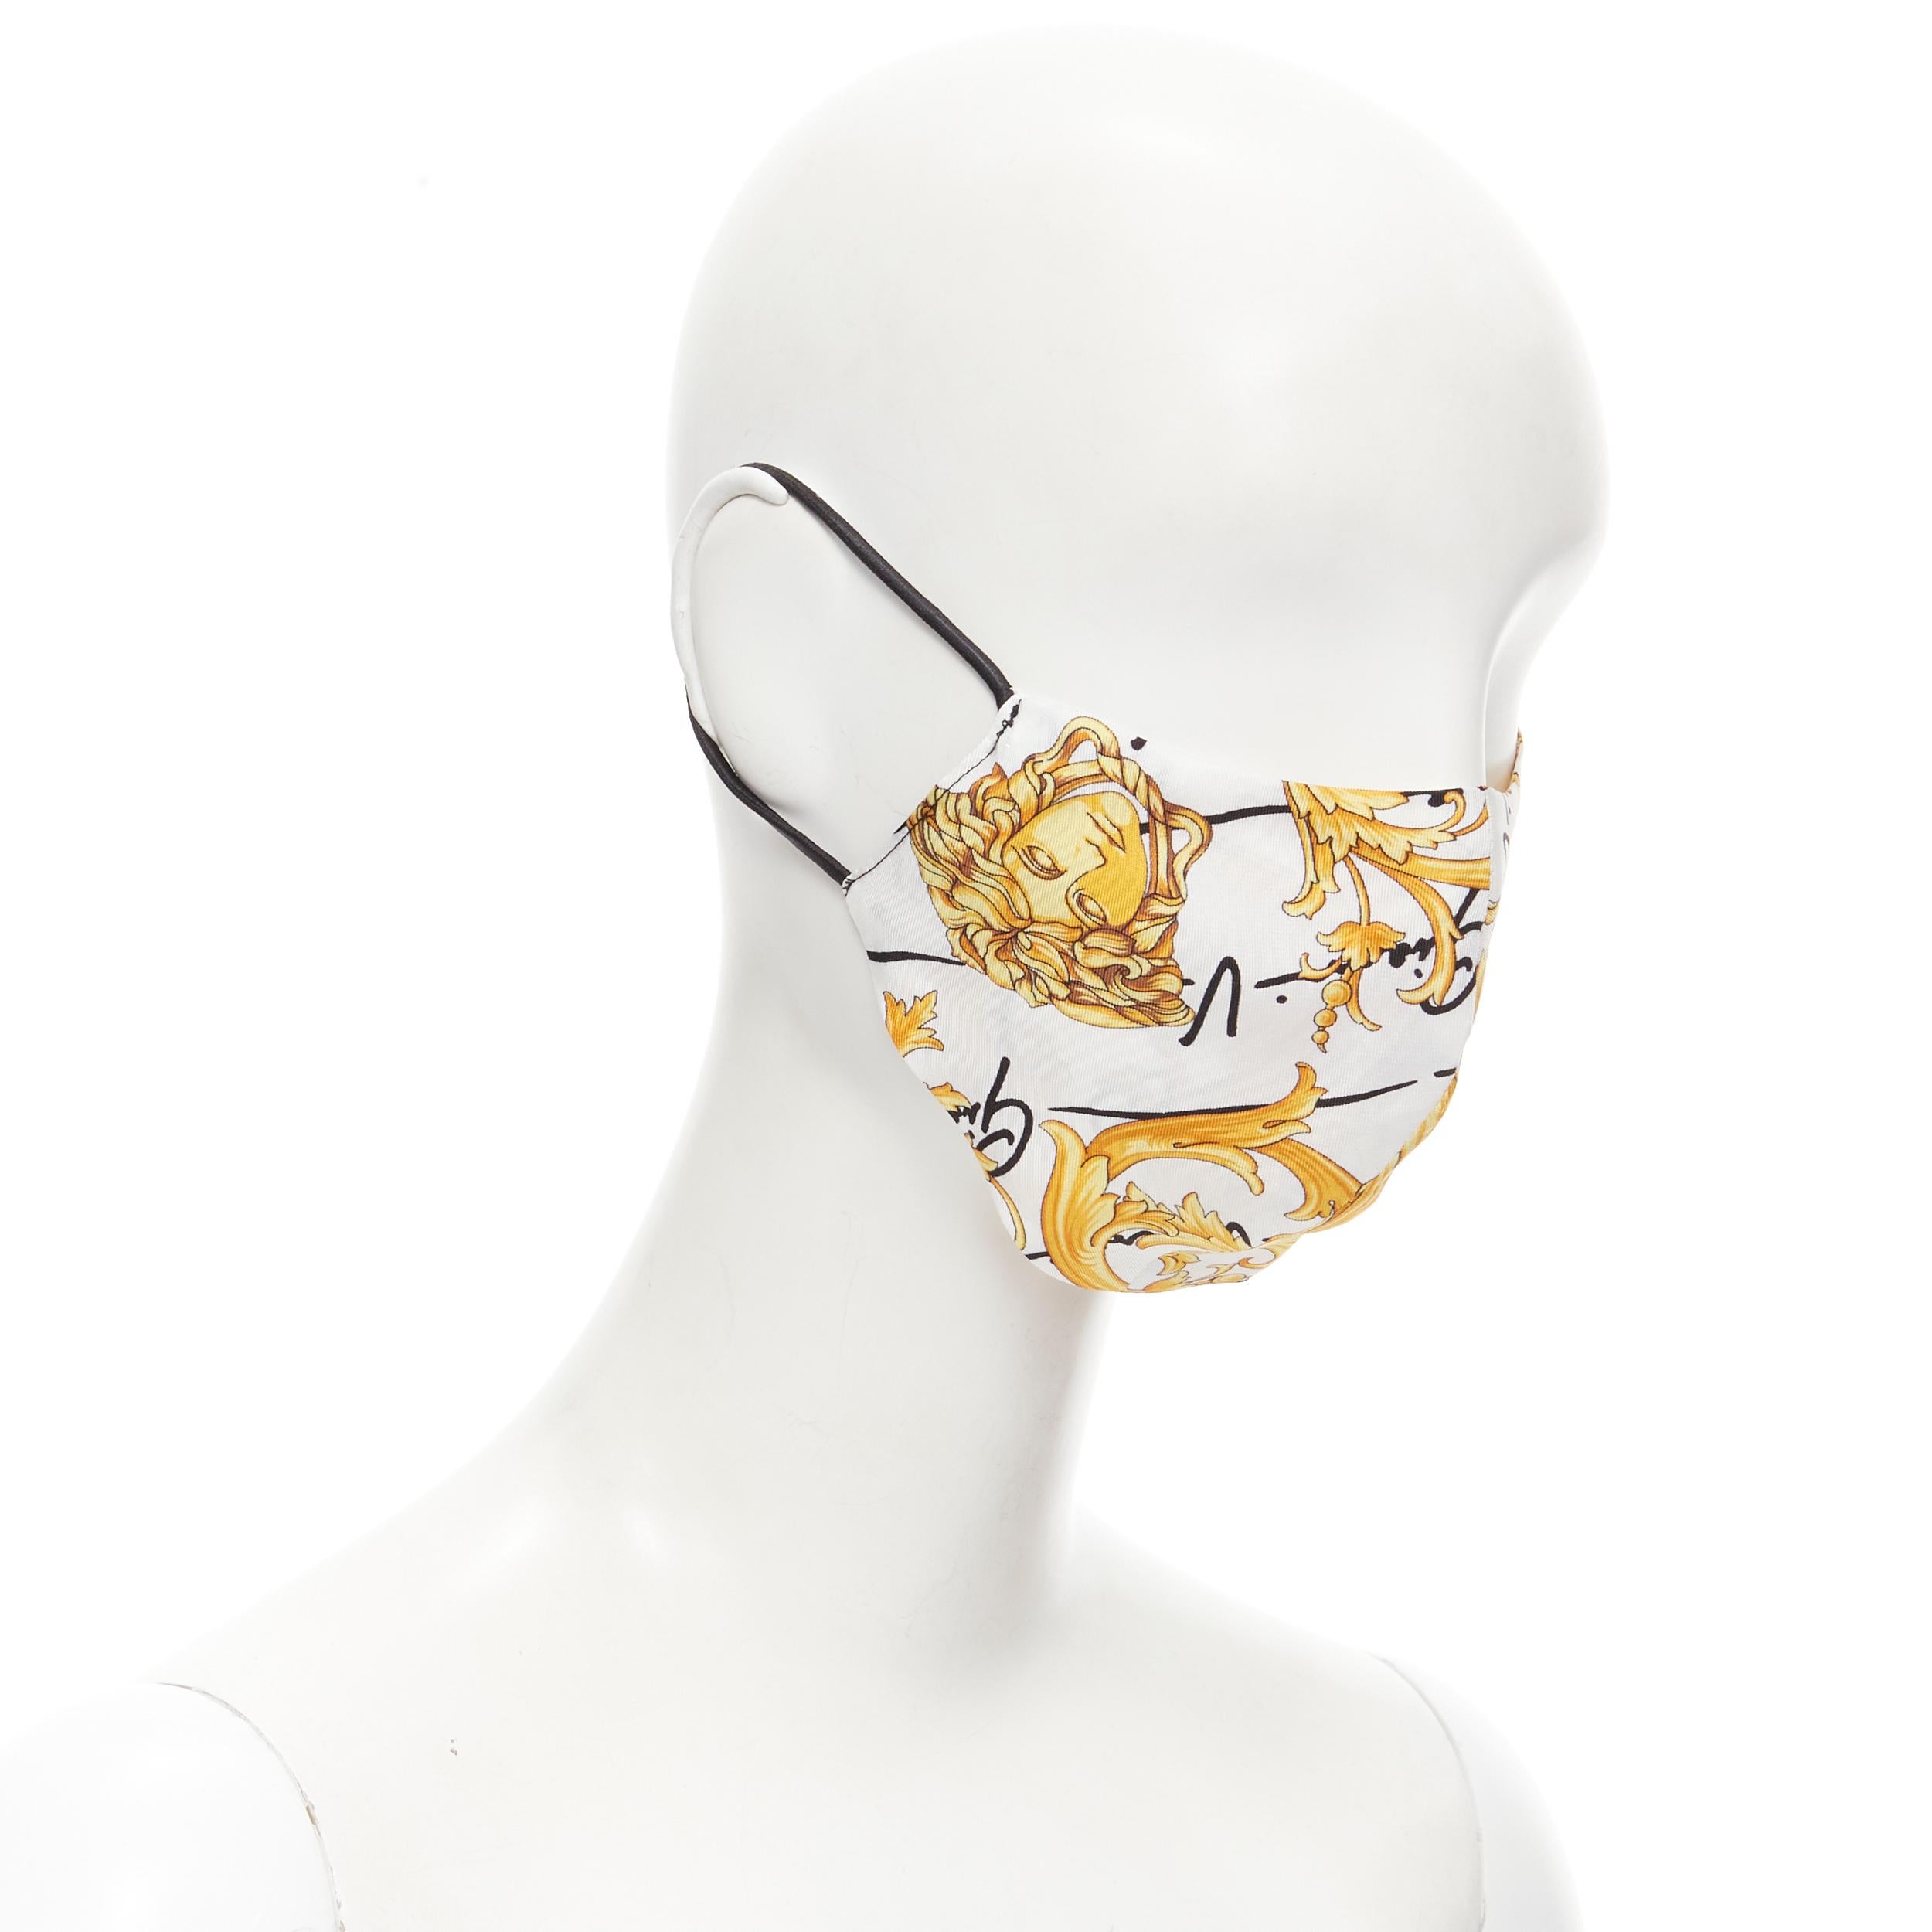 VERSACE Gianni Signature gold Medusa Baroque 100% silk face mask
Reference: TGAS/B01198
Brand: Versace
Designer: Donatella Versace
Model: Gianni Versace Signature
Material: Silk
Color: Gold
Pattern: Floral
Lining: Silk
Extra Details: Worldwide